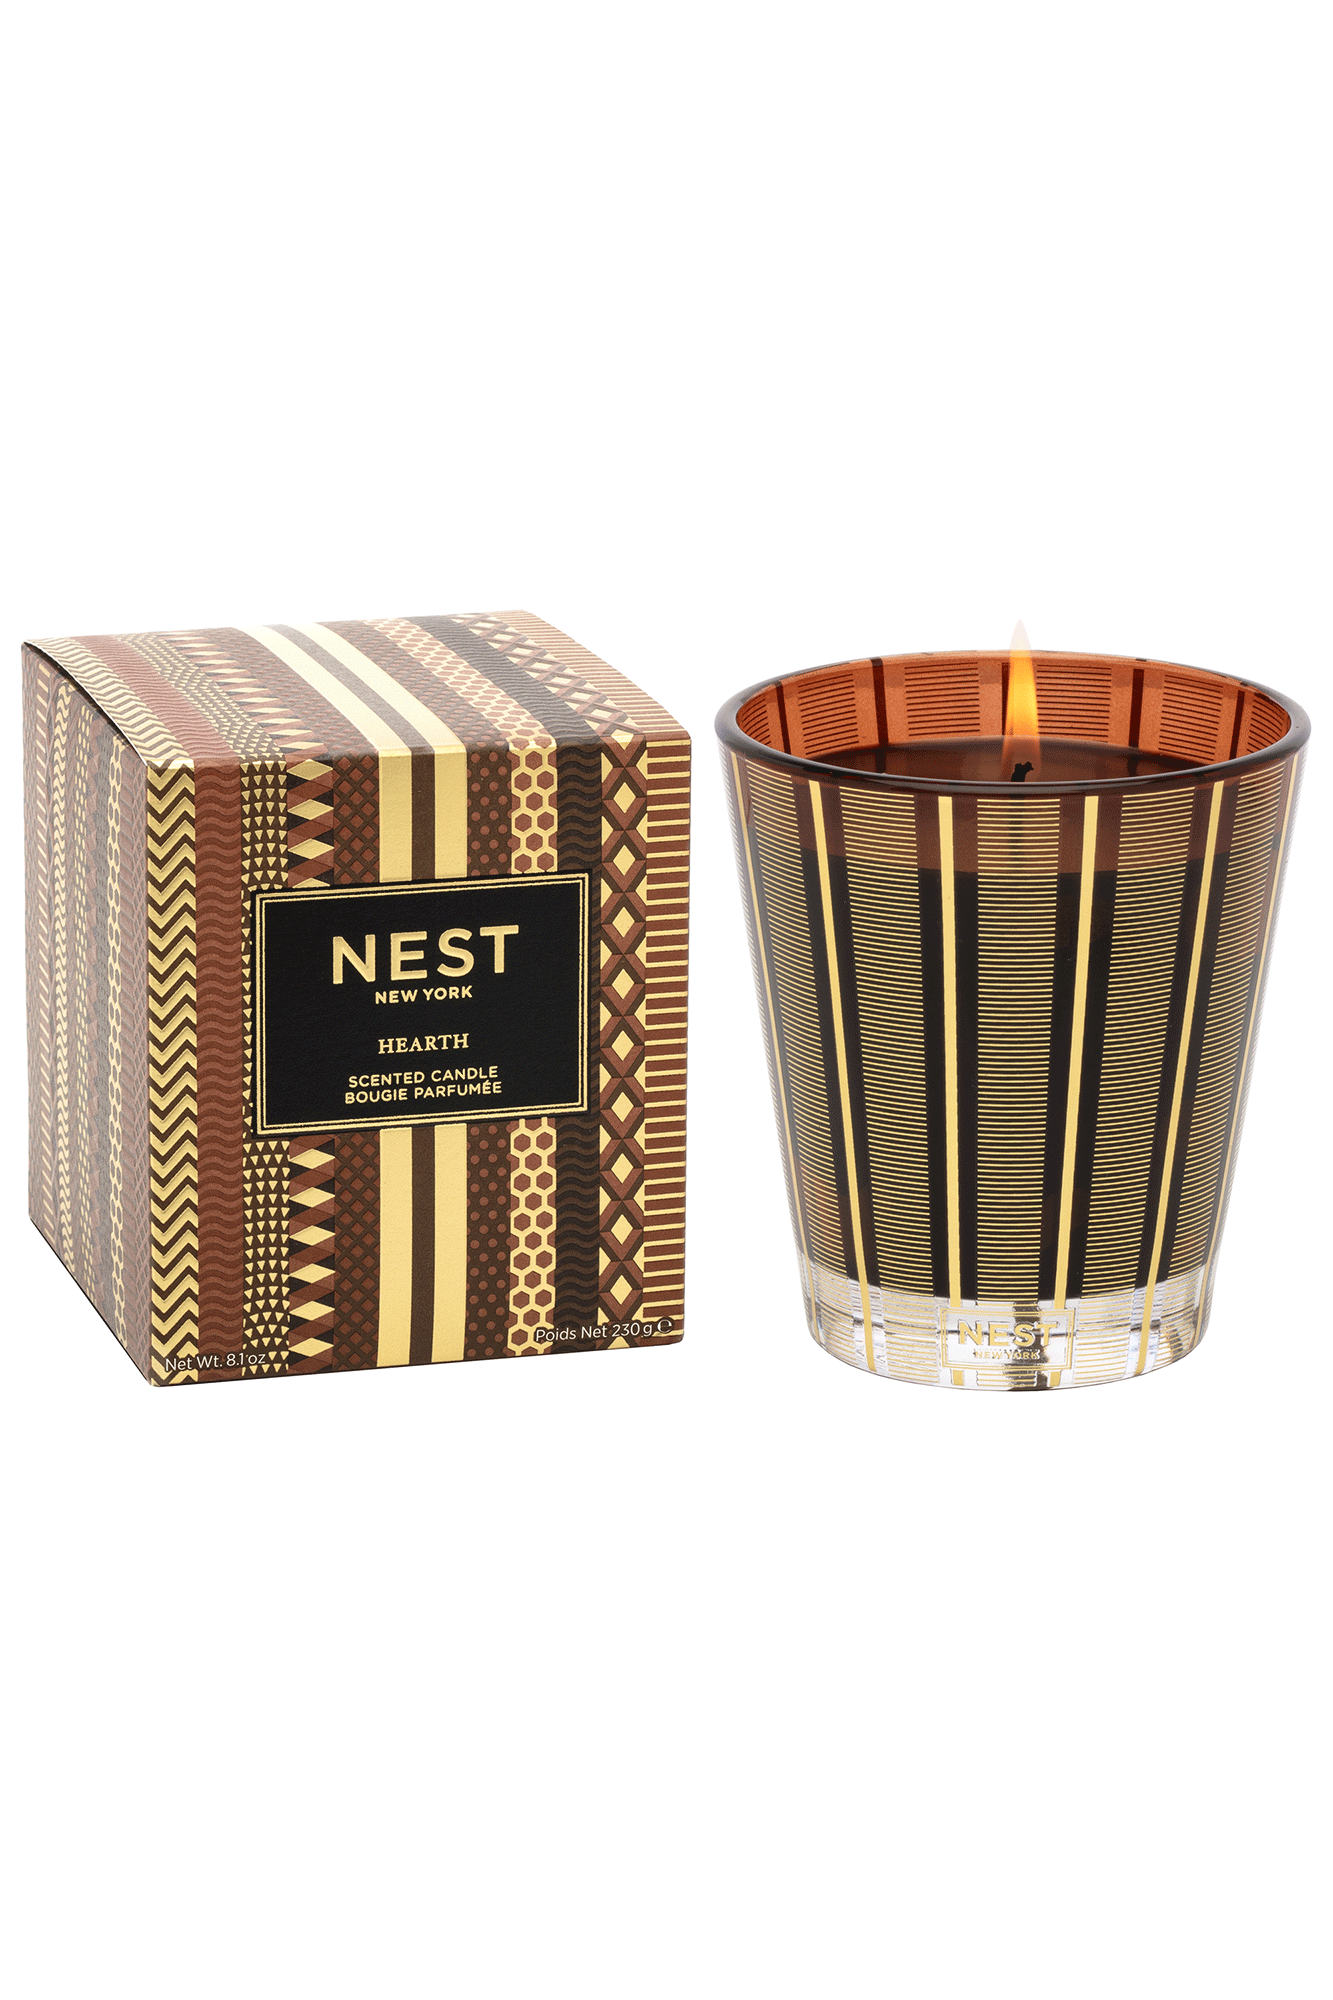 Experience the inviting ambiance of a cozy fireplace in your home with the Hearth Classic Candle from Nest. An exquisite fragrance featuring oud wood, frankincense, and smoky embers creates a warm and inviting atmosphere. Perfect for adding a cozy touch to any evening.